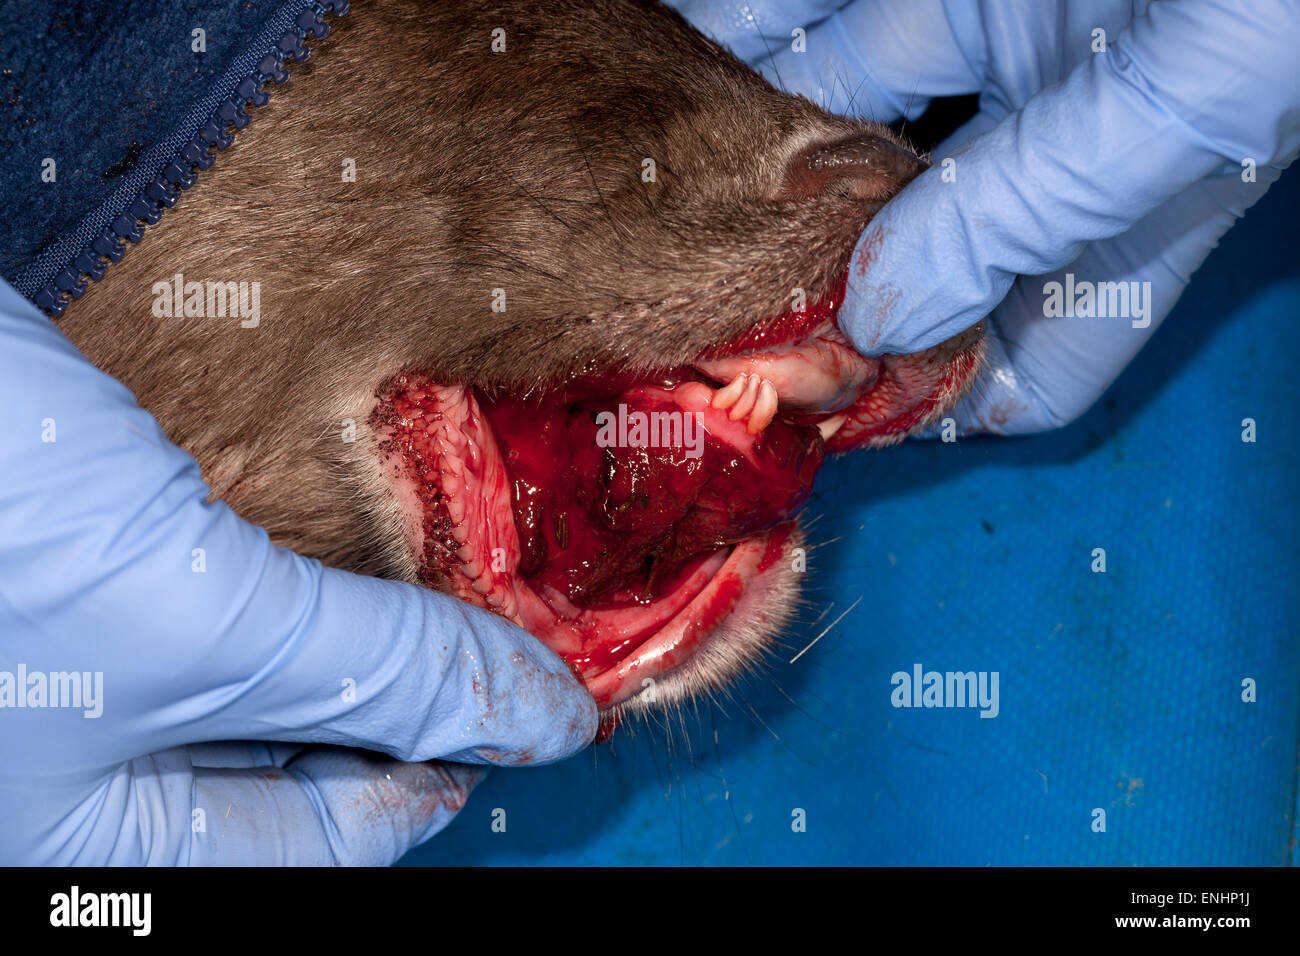 Fallow Deer with injury to mouth Stock Photo